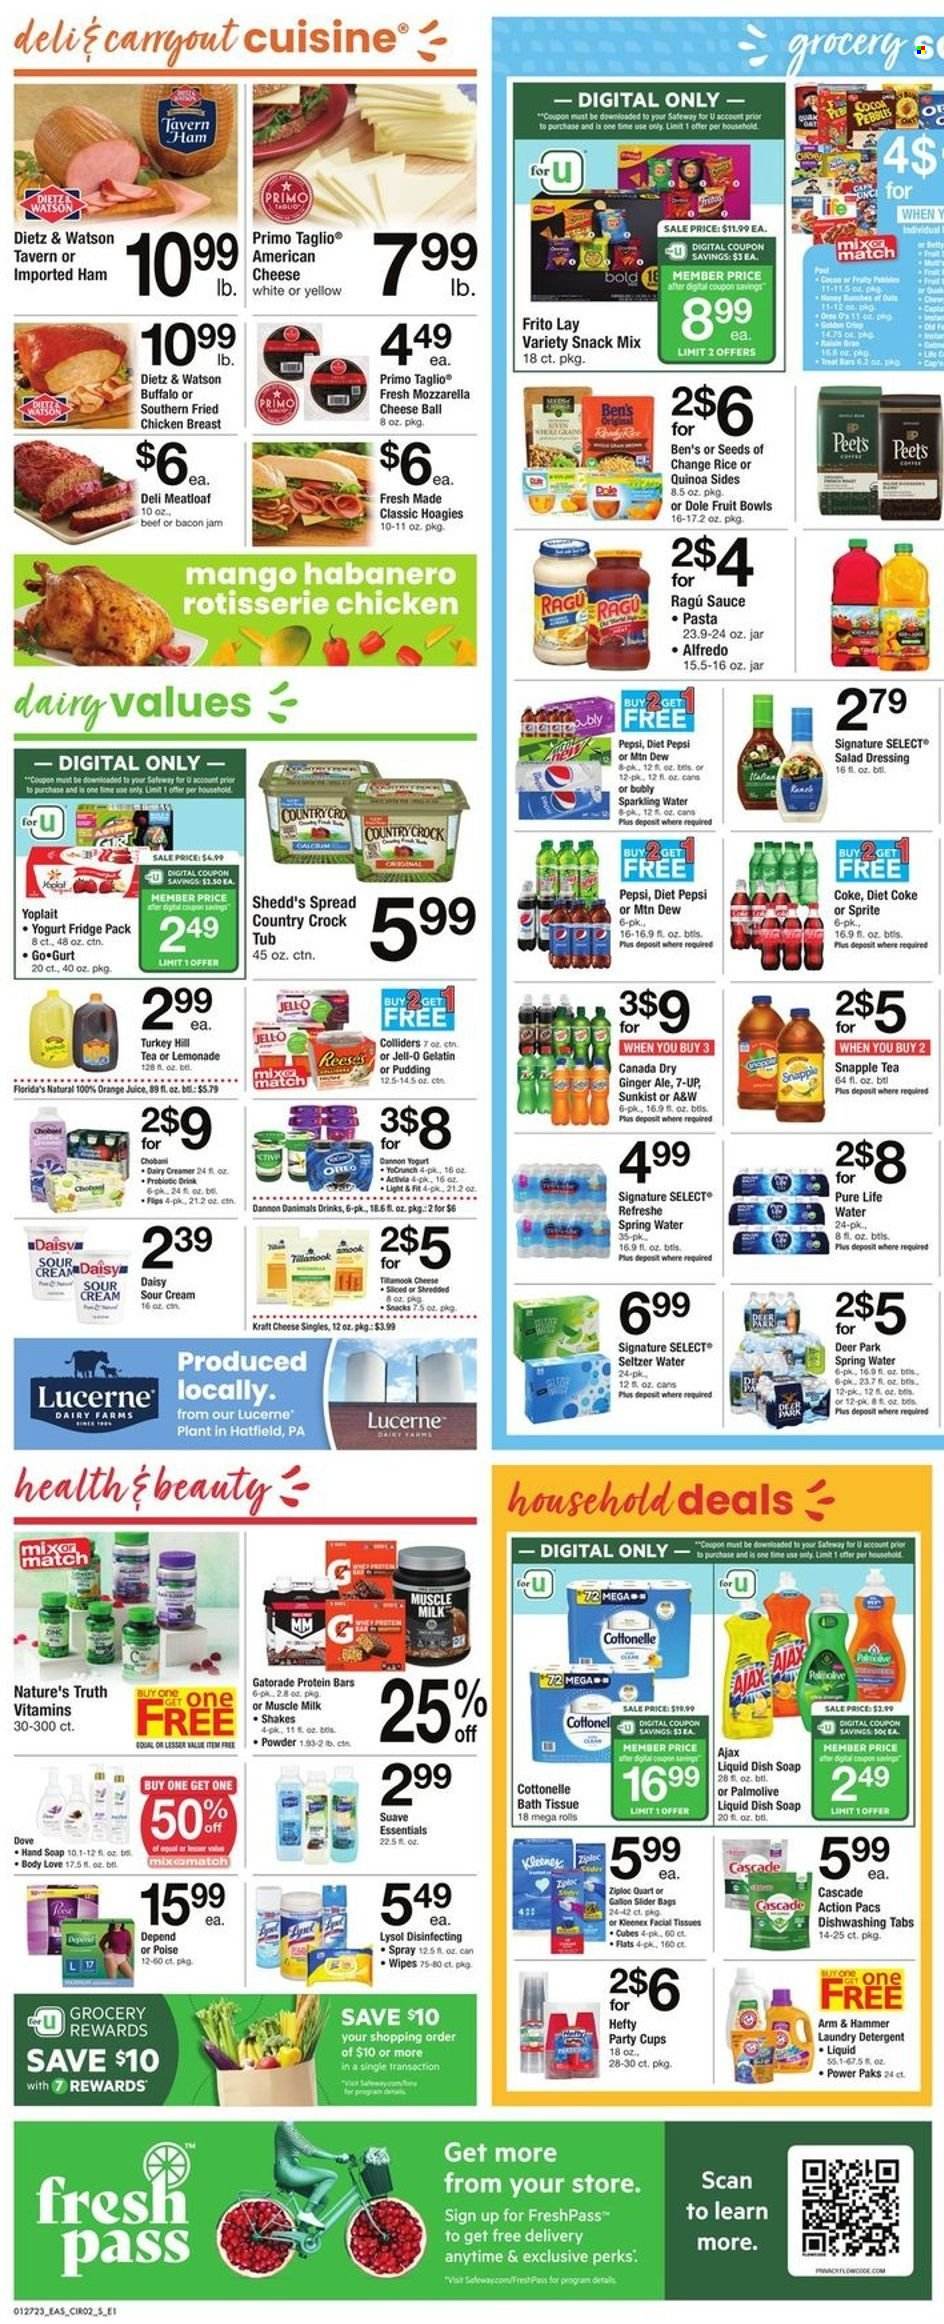 thumbnail - Safeway Flyer - 01/27/2023 - 02/02/2023 - Sales products - Dole, mango, meatloaf, chicken roast, pasta, sauce, fried chicken, Kraft®, bacon, ham, Dietz & Watson, american cheese, mozzarella, pudding, Oreo, yoghurt, Activia, Yoplait, Dannon, Danimals, milk, shake, muscle milk, sour cream, creamer, Reese's, Dove, snack, Florida's Natural, ARM & HAMMER, Jell-O, protein bar, quinoa, salad dressing, dressing, ragu, Canada Dry, Coca-Cola, ginger ale, lemonade, Mountain Dew, Sprite, Pepsi, orange juice, juice, Diet Pepsi, Diet Coke, 7UP, Snapple, A&W, Gatorade, seltzer water, spring water, sparkling water, Pure Life Water, tea, bath tissue, Cottonelle, Kleenex, wipes, detergent, Lysol, Ajax, Cascade, laundry detergent, Suave, hand soap, Palmolive, soap, facial tissues, bag, Ziploc, Hefty, cup, party cups, bunches, Nature's Truth, gelatin. Page 2.